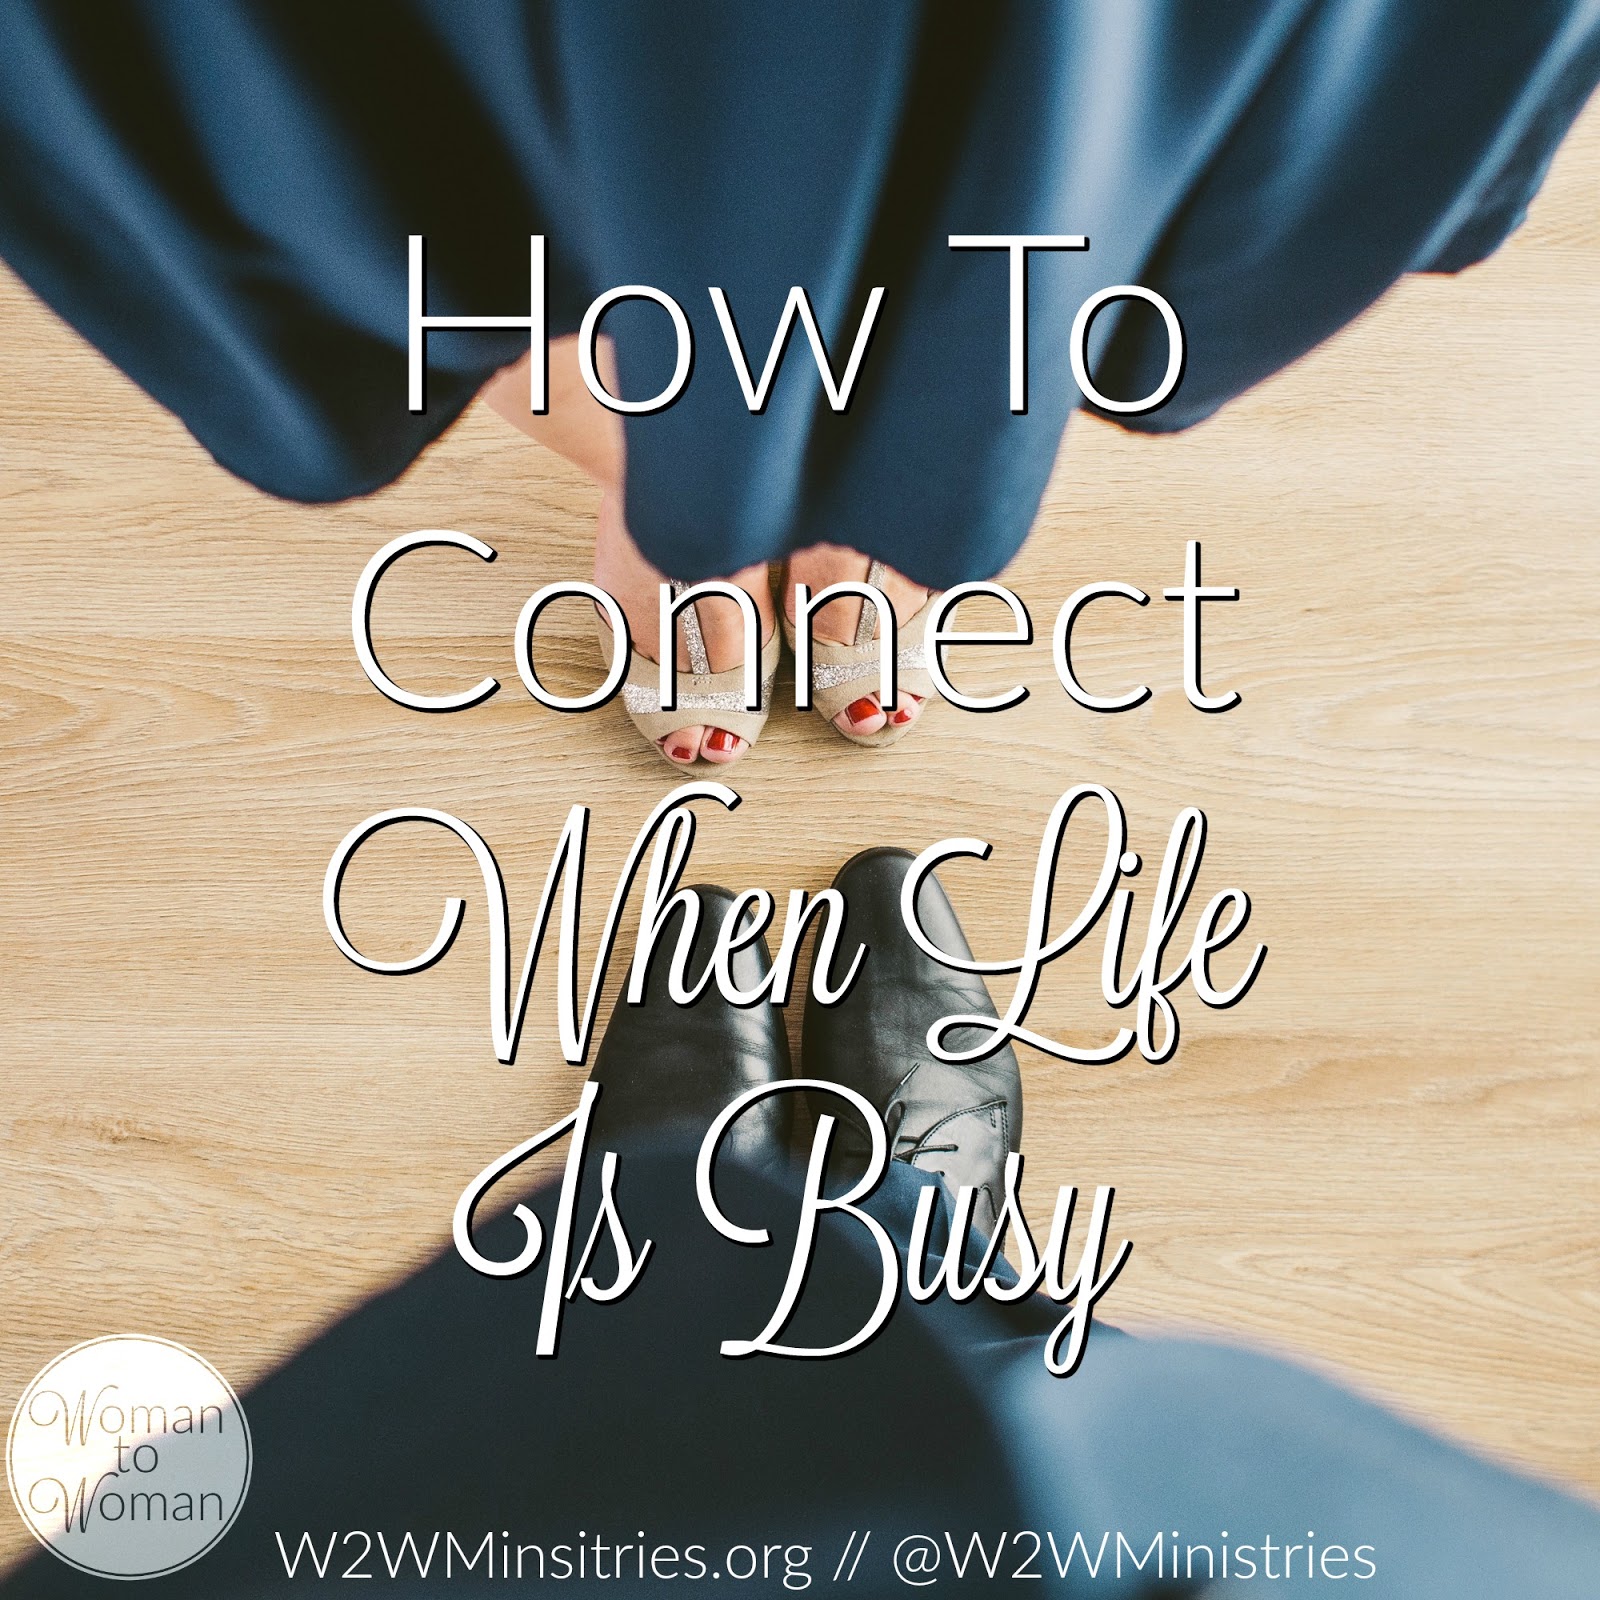 Woman to Woman: How To Connect When Life Is Busy